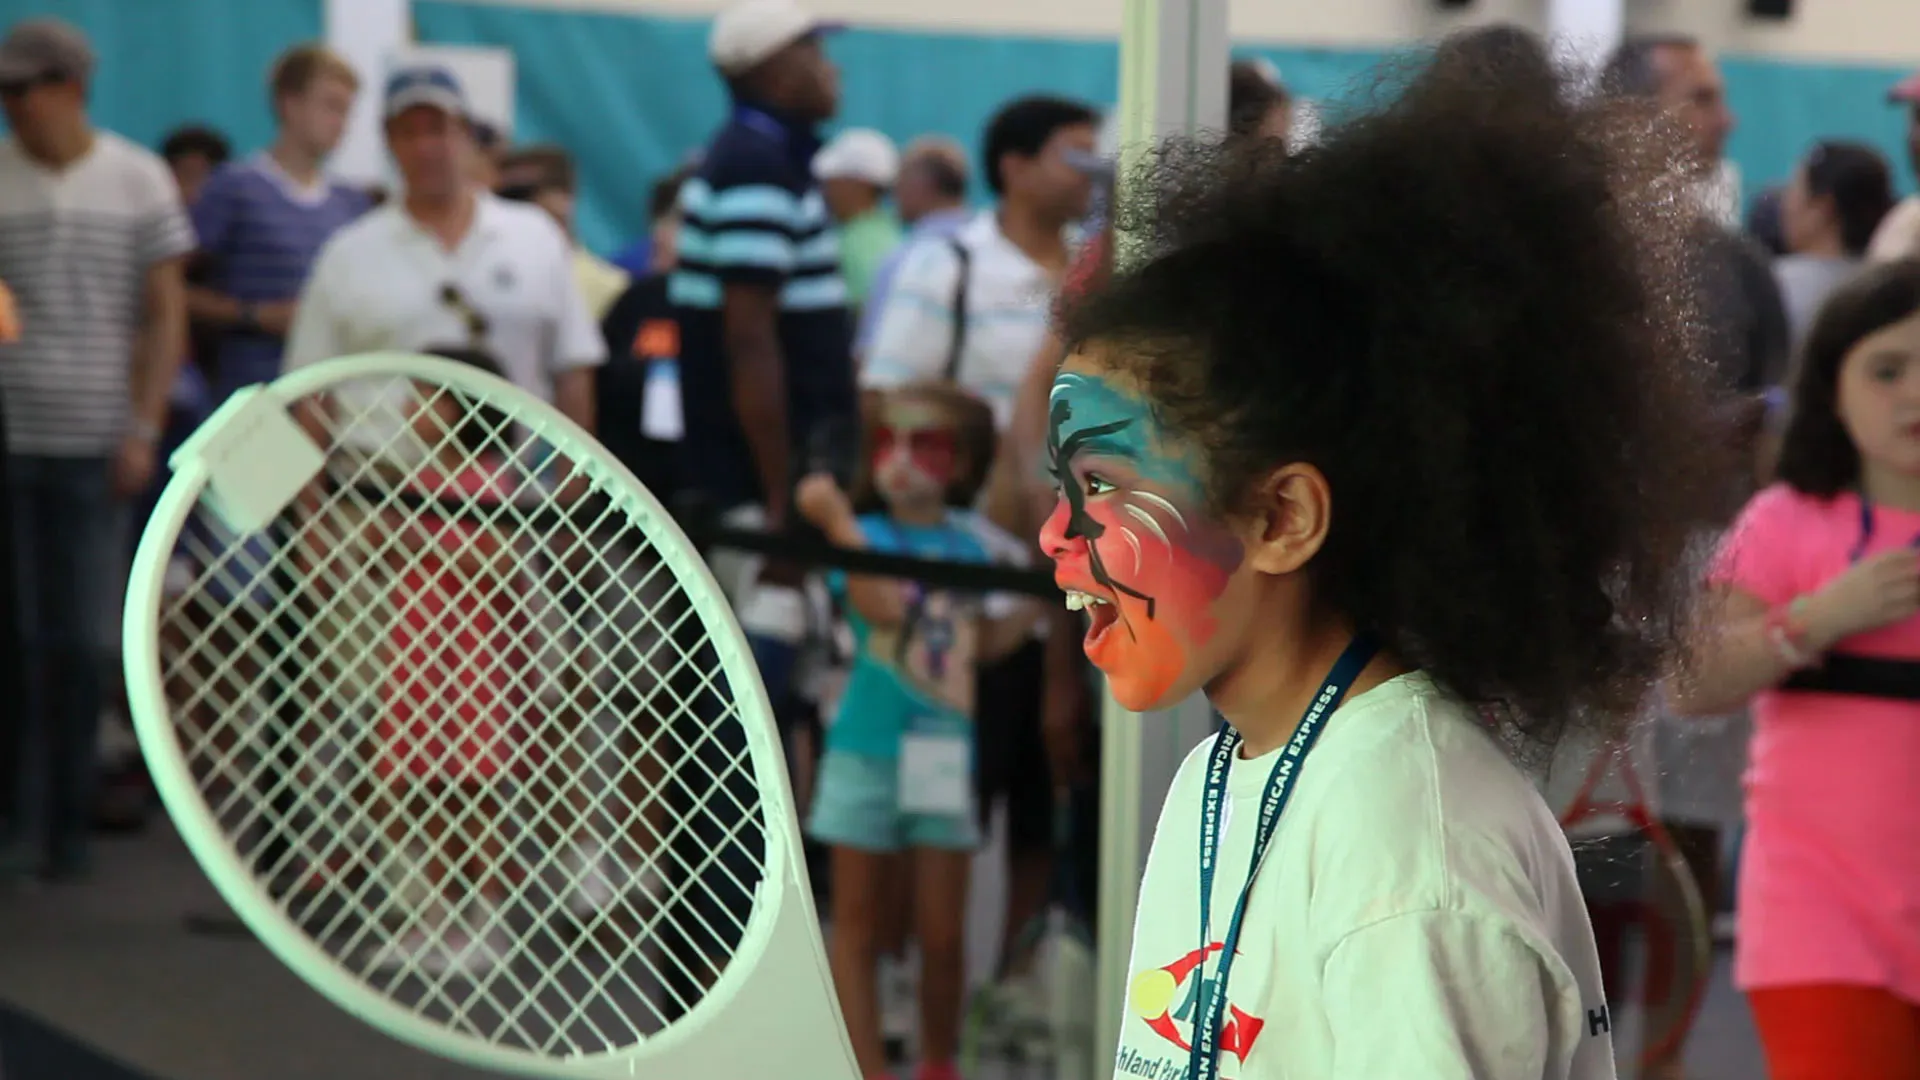 Art and Sound of Tennis - kids loved it